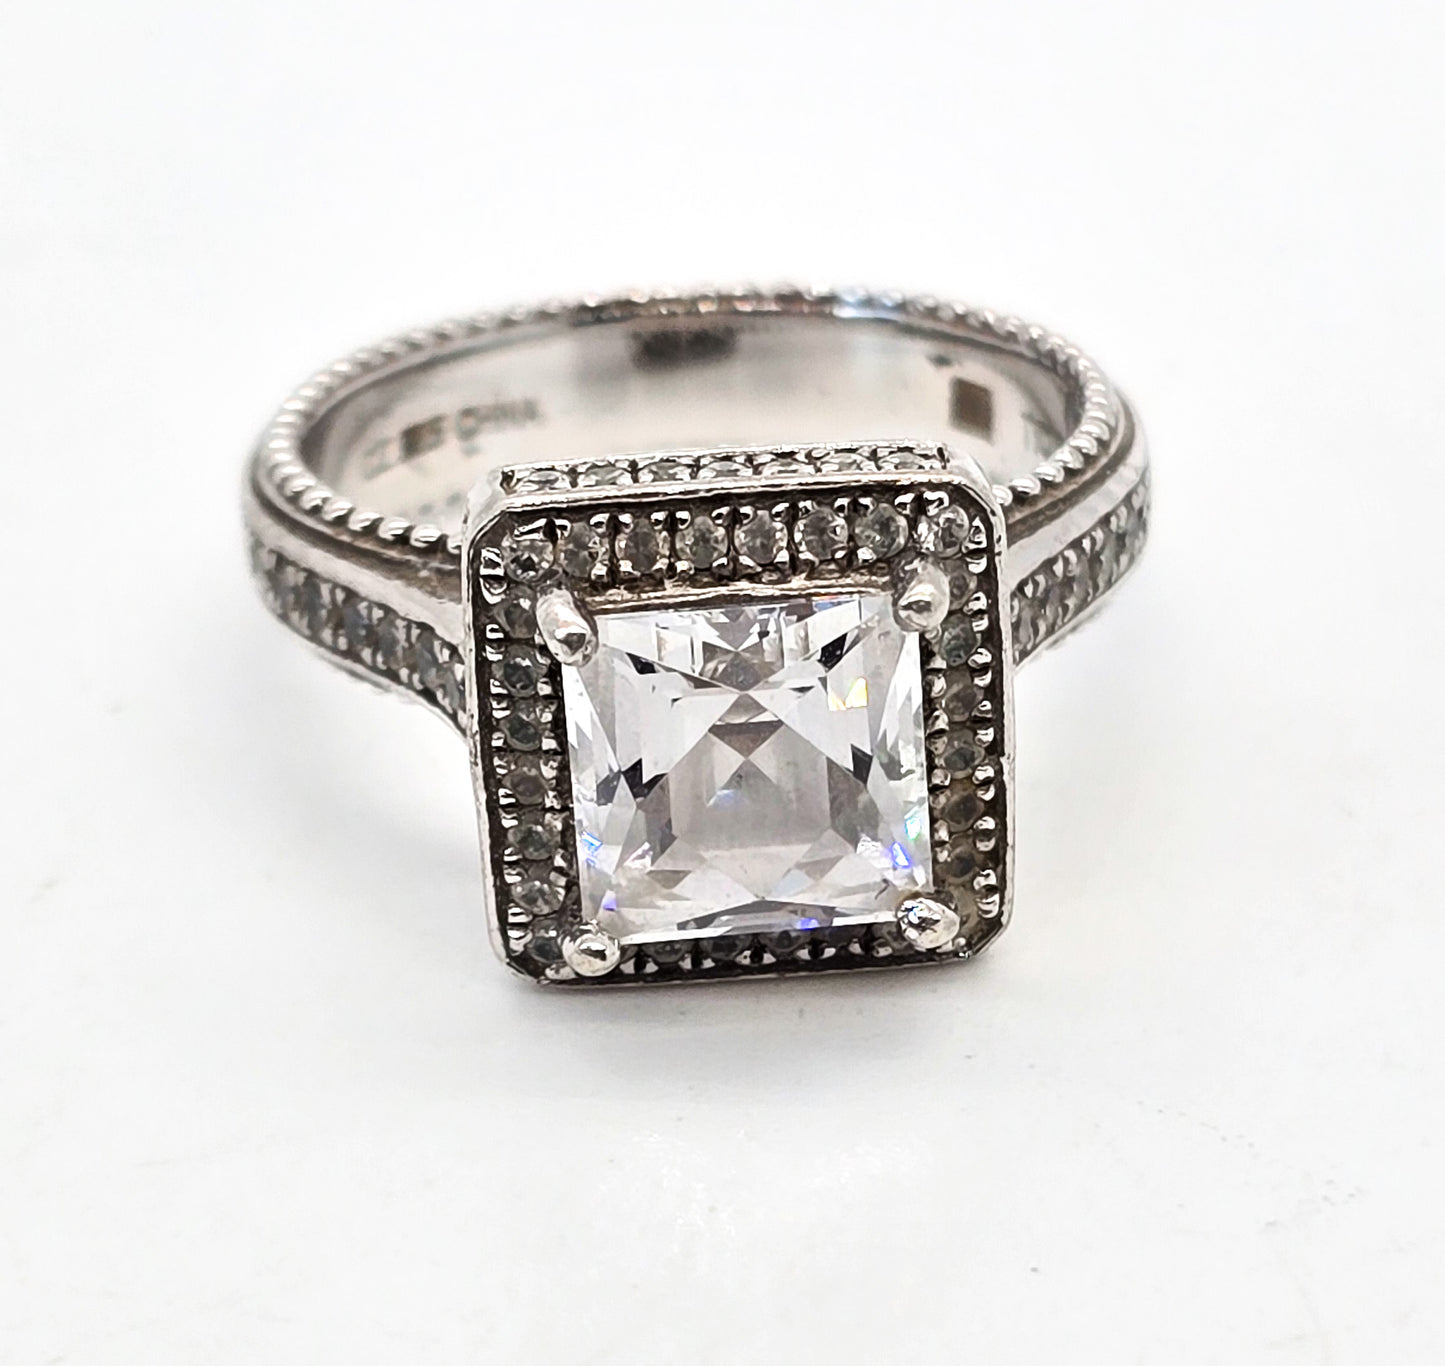 Tycoon Cubic Zirconia Princess cut high end sterling silver ring size 9